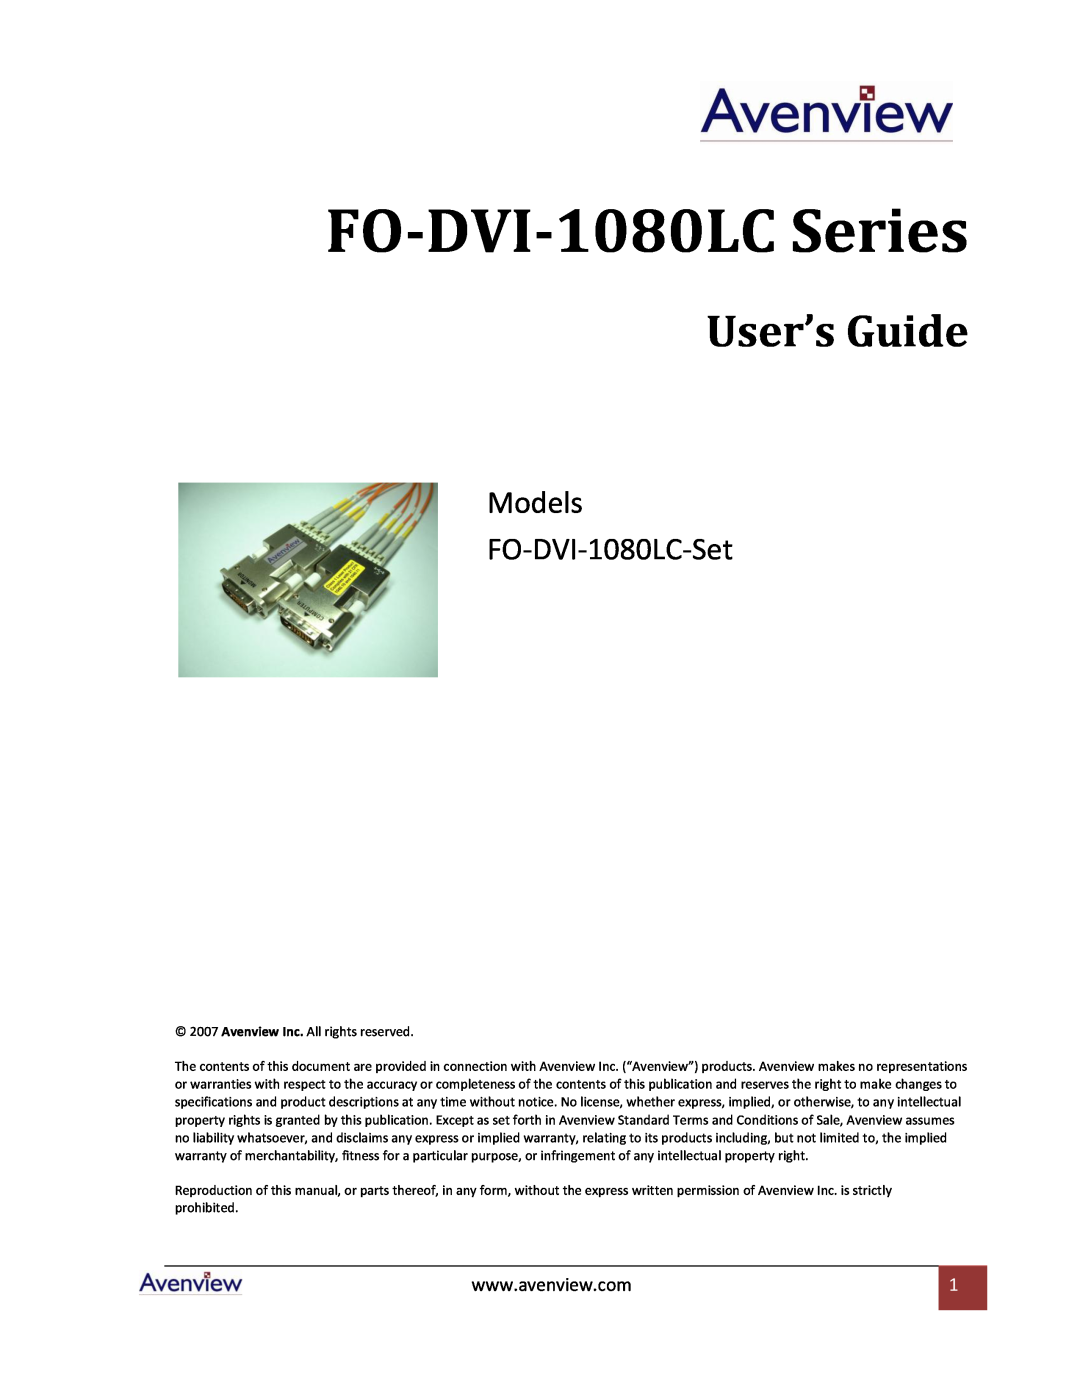 Avenview specifications FO-DVI-1080LC Series, User’s Guide, Models FO-DVI-1080LC-Set 